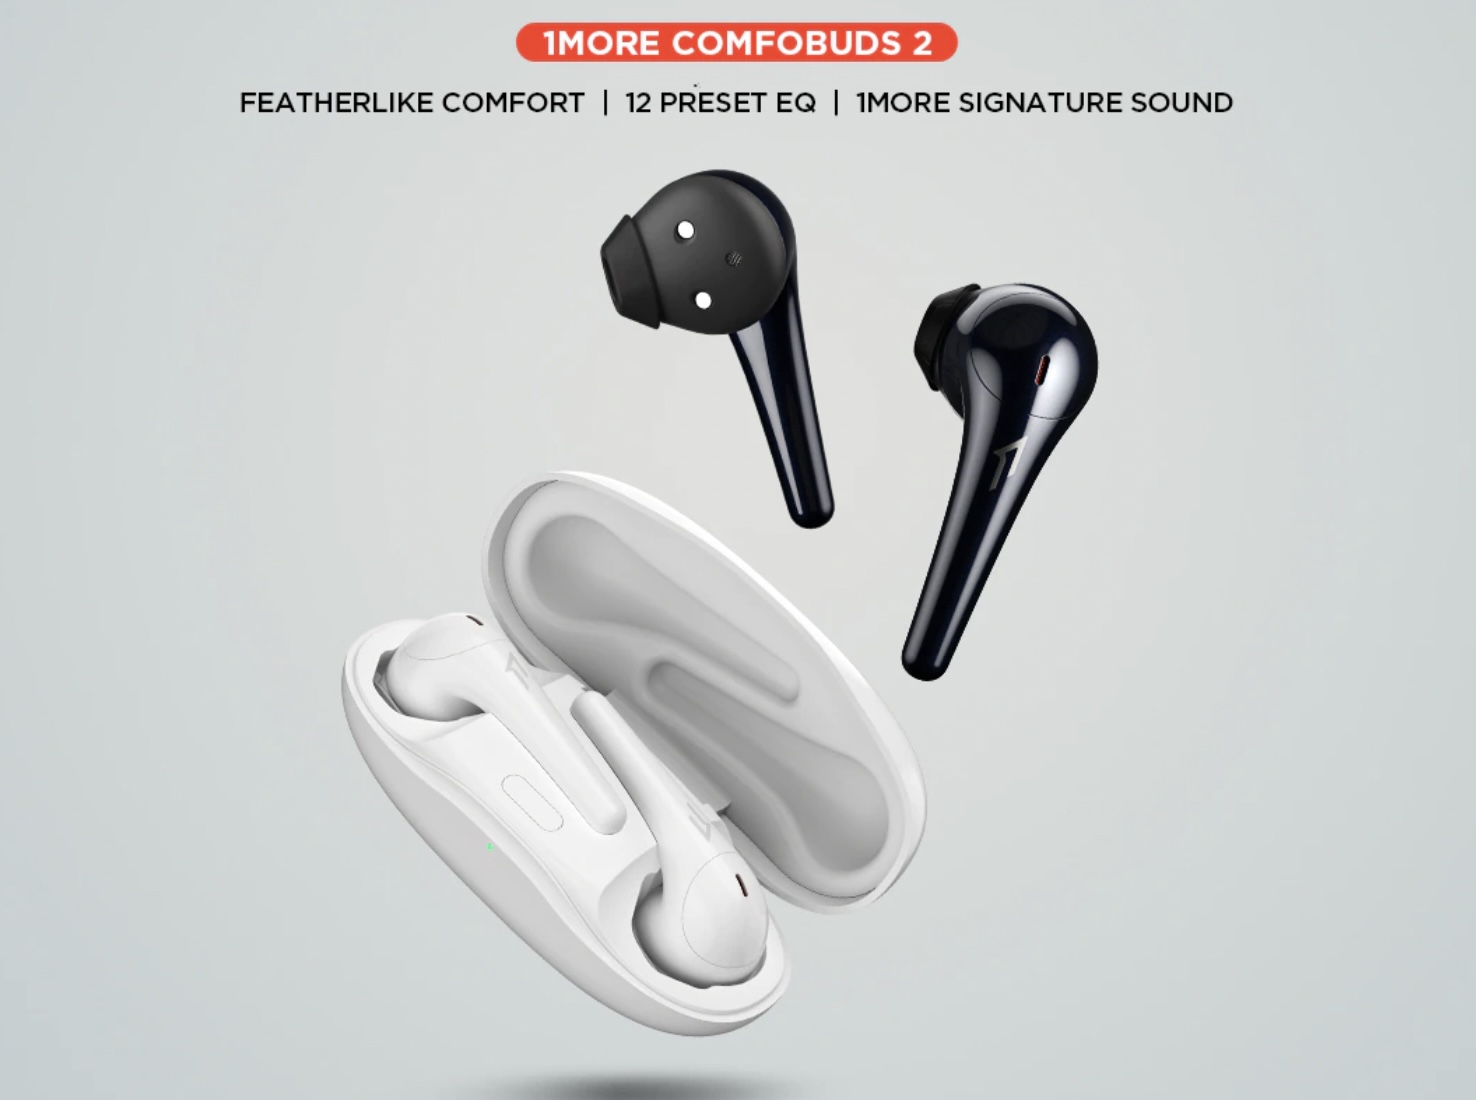 Auriculares 1MORE ComfoBuds 2